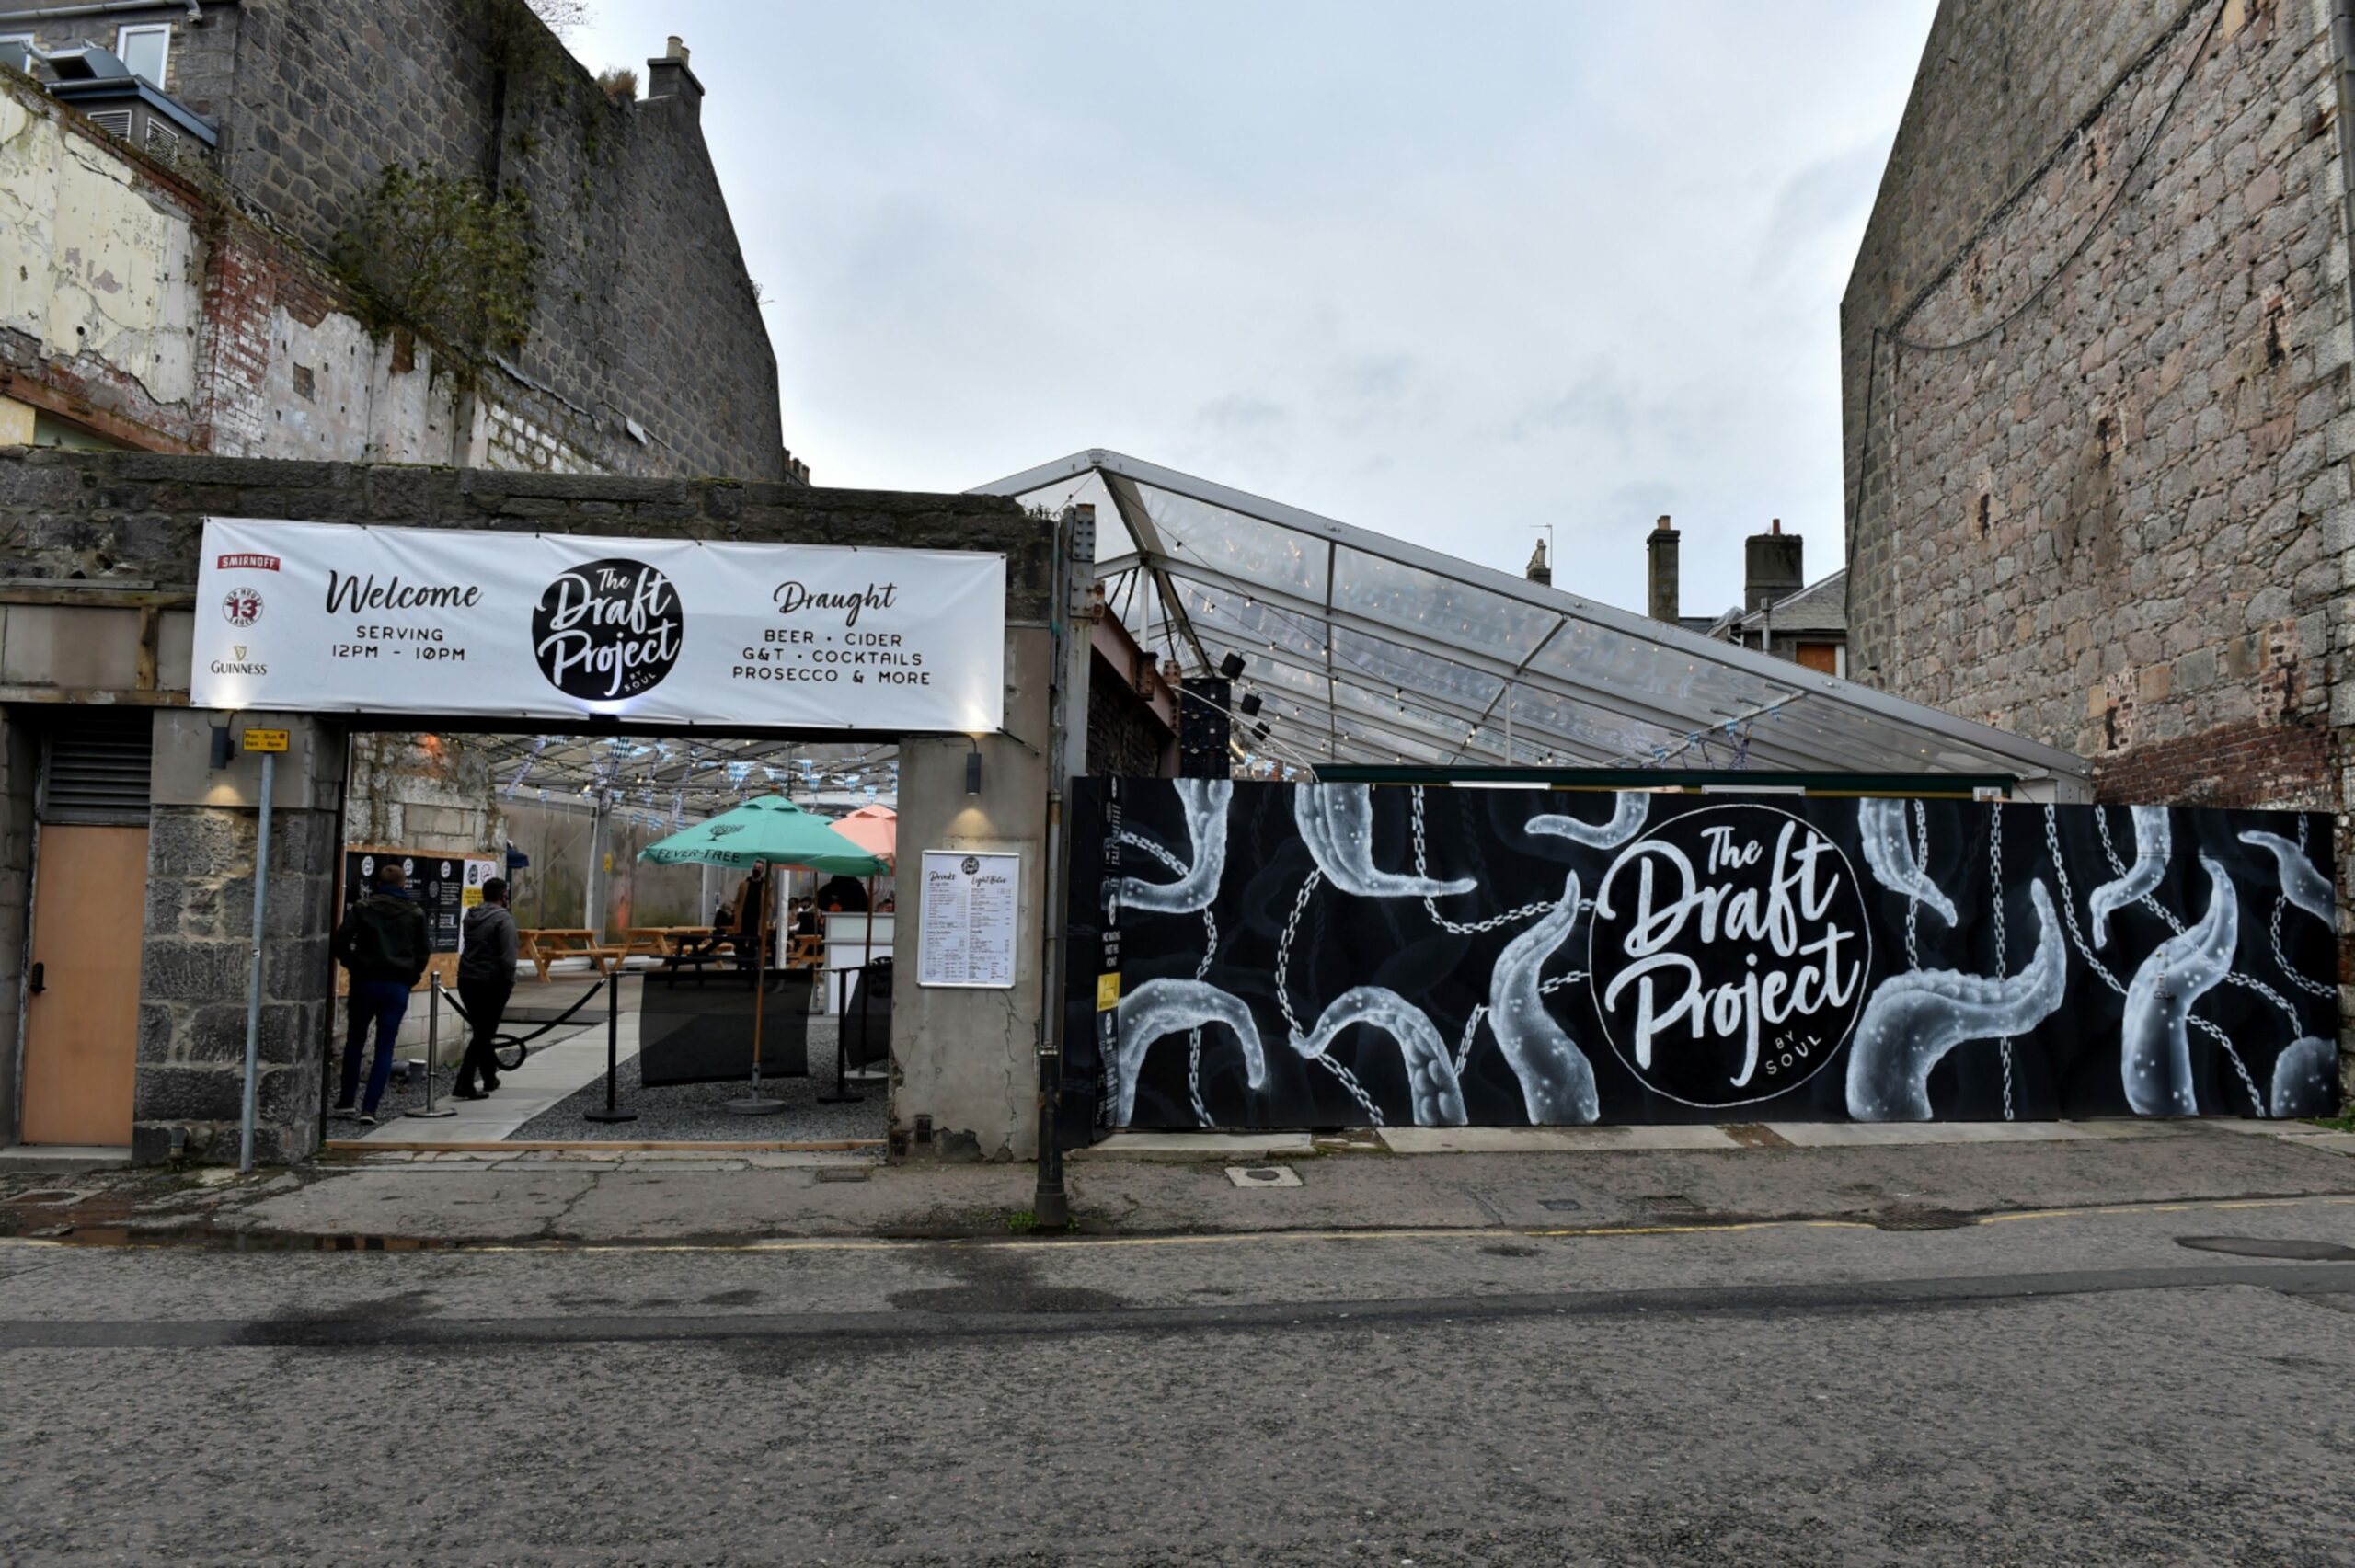 The Draft Project approved for two more years after being hailed as Aberdeen’s answer to famous ‘ruin bars’ of Budapest